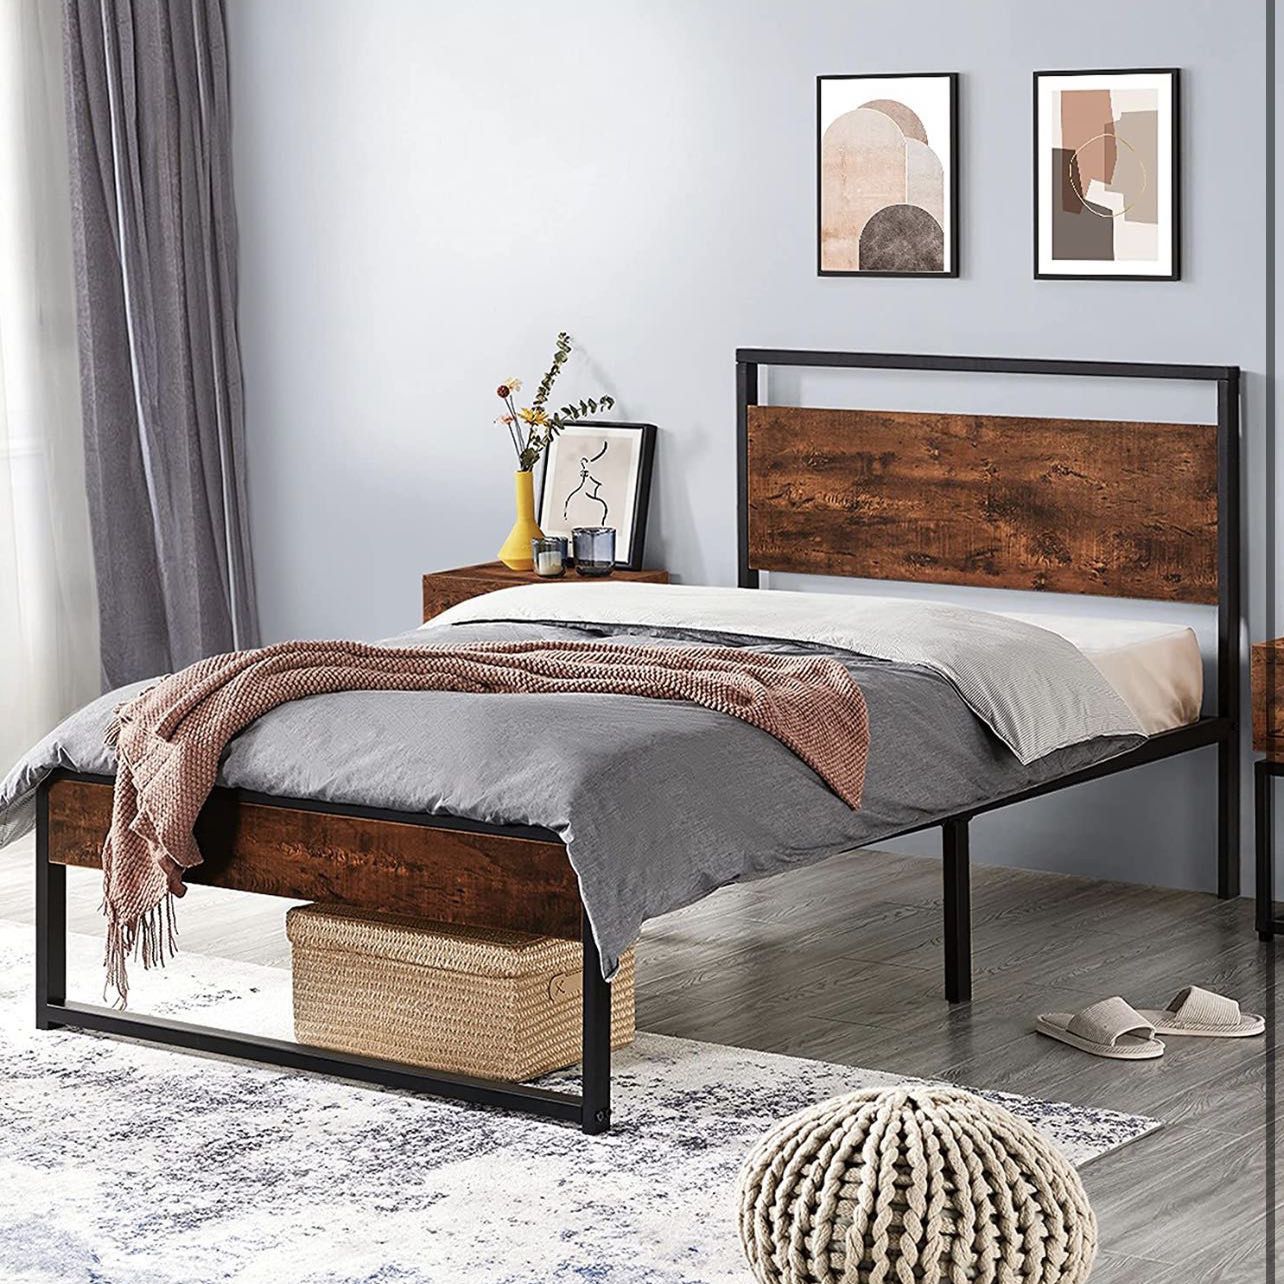 Twin Metal Platform Bed Frame with Rustic Wooden Headboard and Footboard, Single Country Bed for Boys& Girls, No Box Spring Needed/12 Inch Underbed St